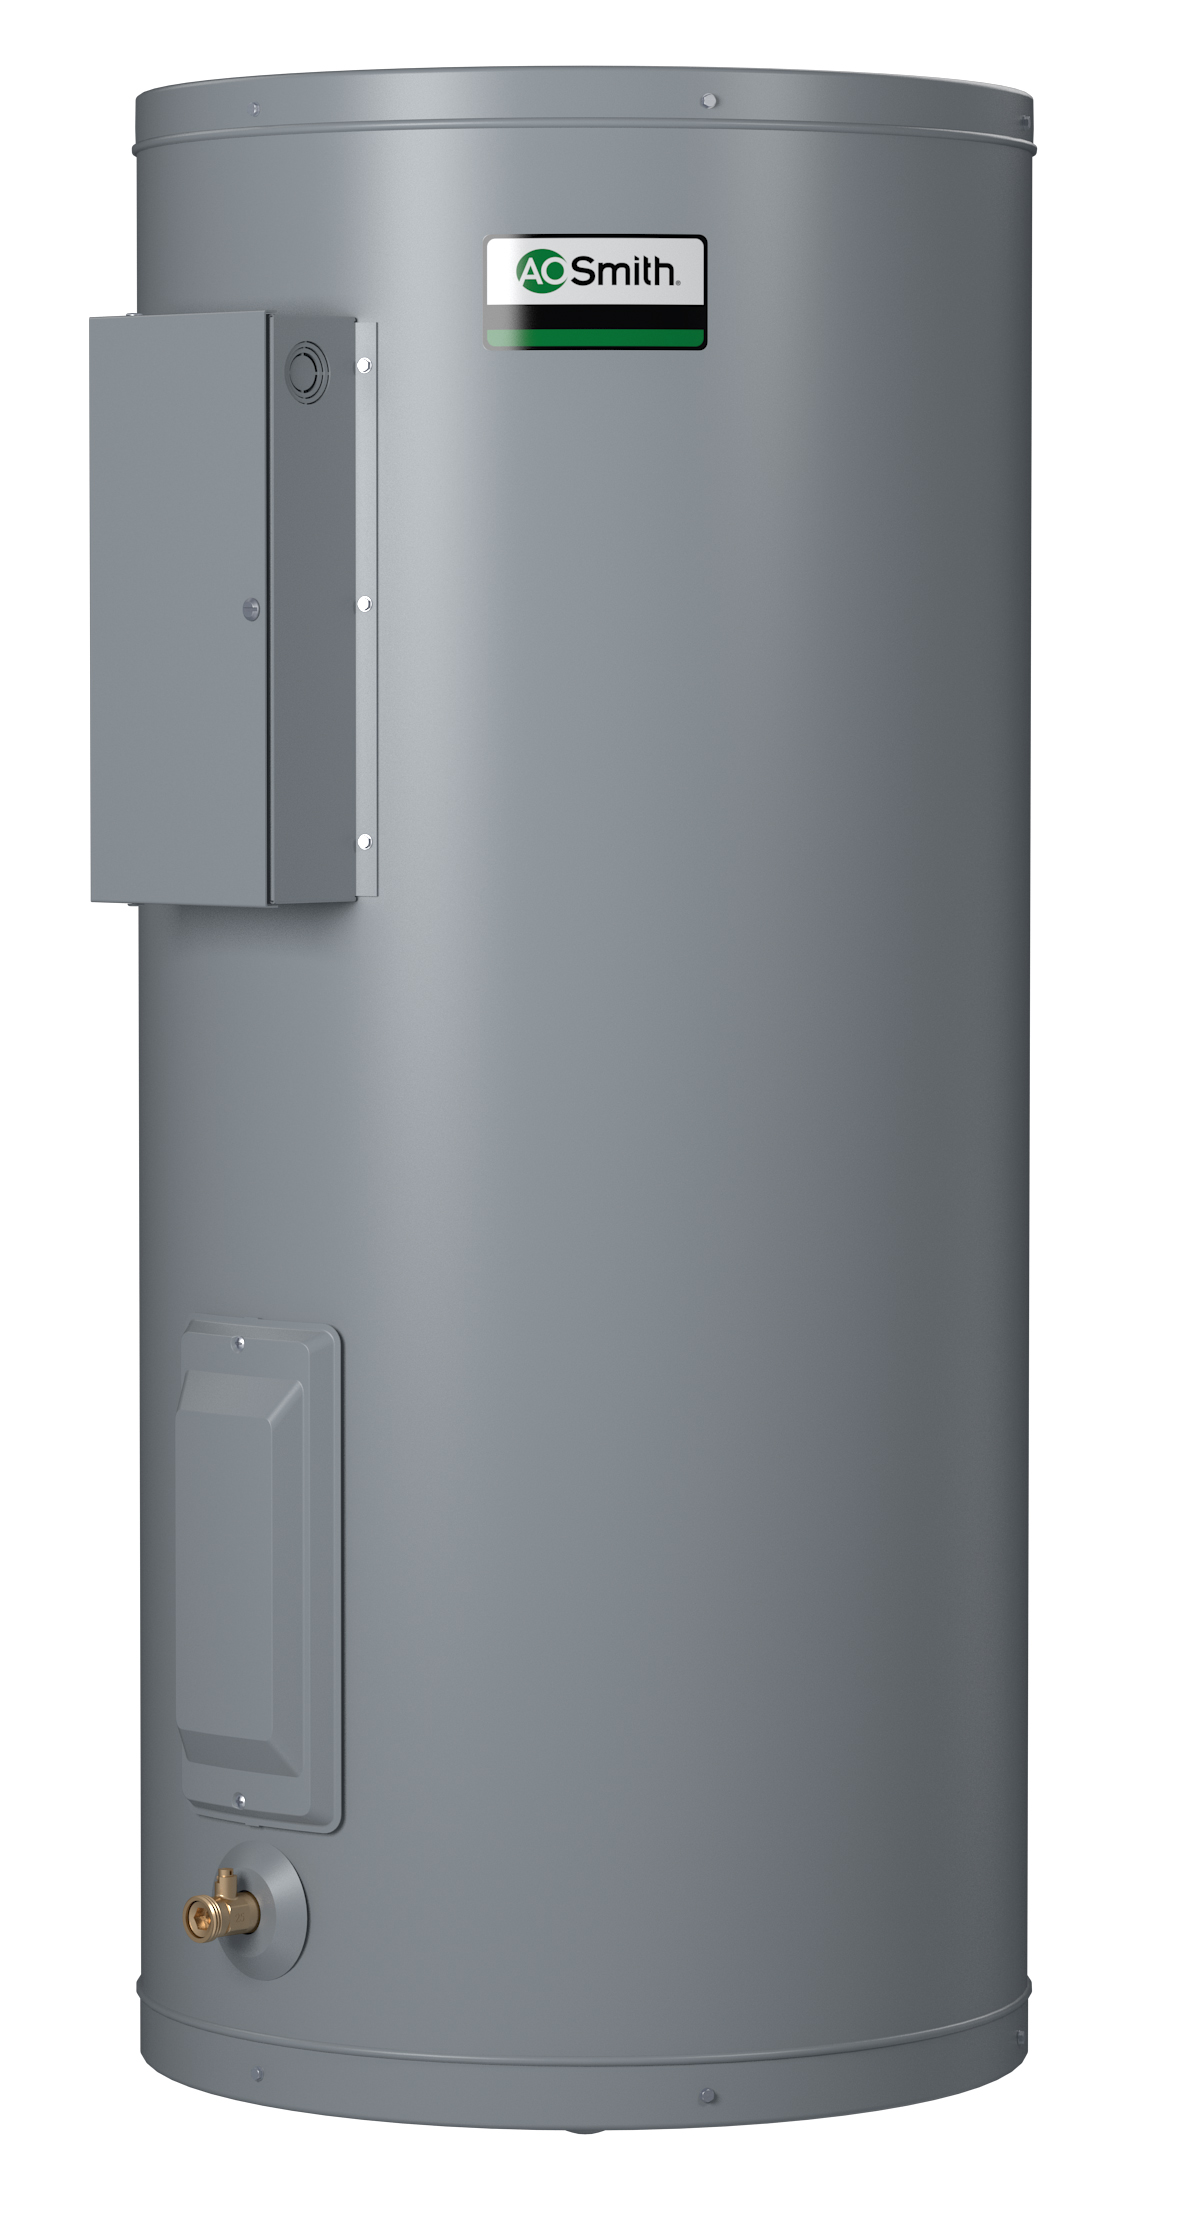 AO SMITH DEL-40D: 38 GALLONS, 2.0KW, 208 VOLT, 1 PHASE, (2-2000 WATT ELEMENTS, NON-SIMULTANEOUS WIRING), DURA-POWER, LIGHT DUTY COMMERCIAL ELECTRIC WATER HEATER